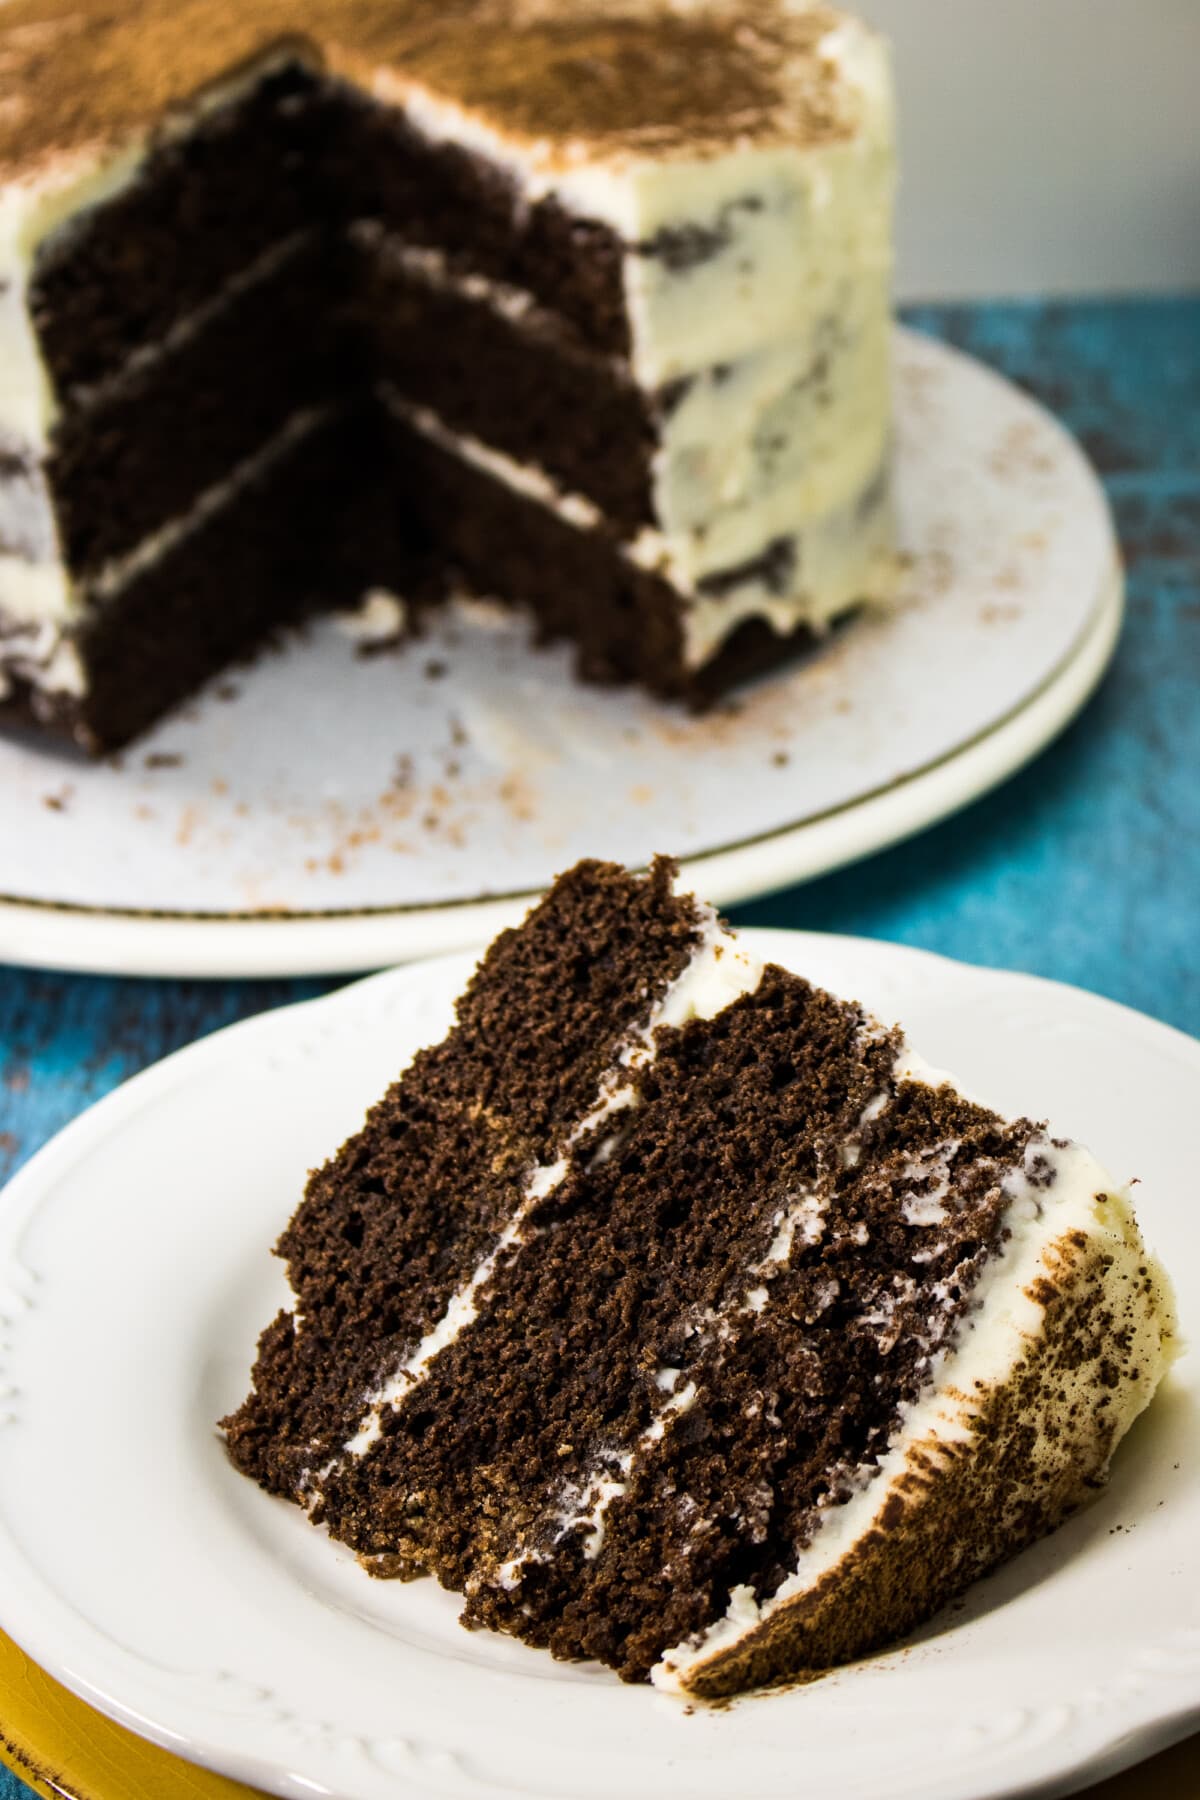 Chocolate Stout Cake with Whiskey Buttercream Frosting